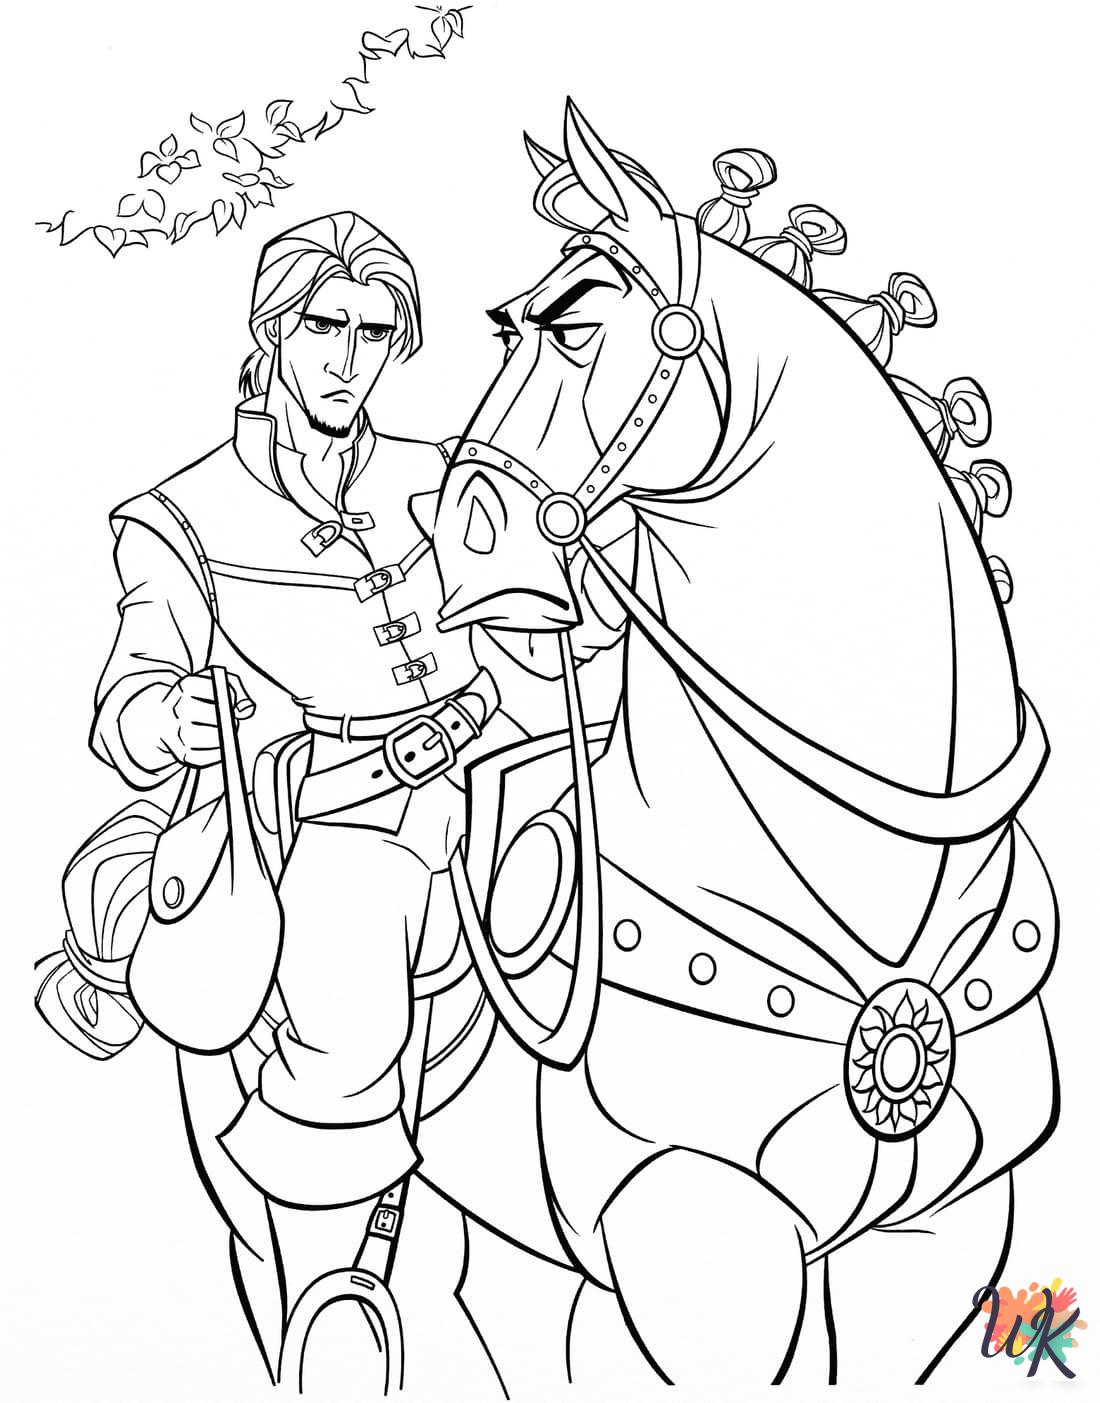 Tangled coloring pages printable free